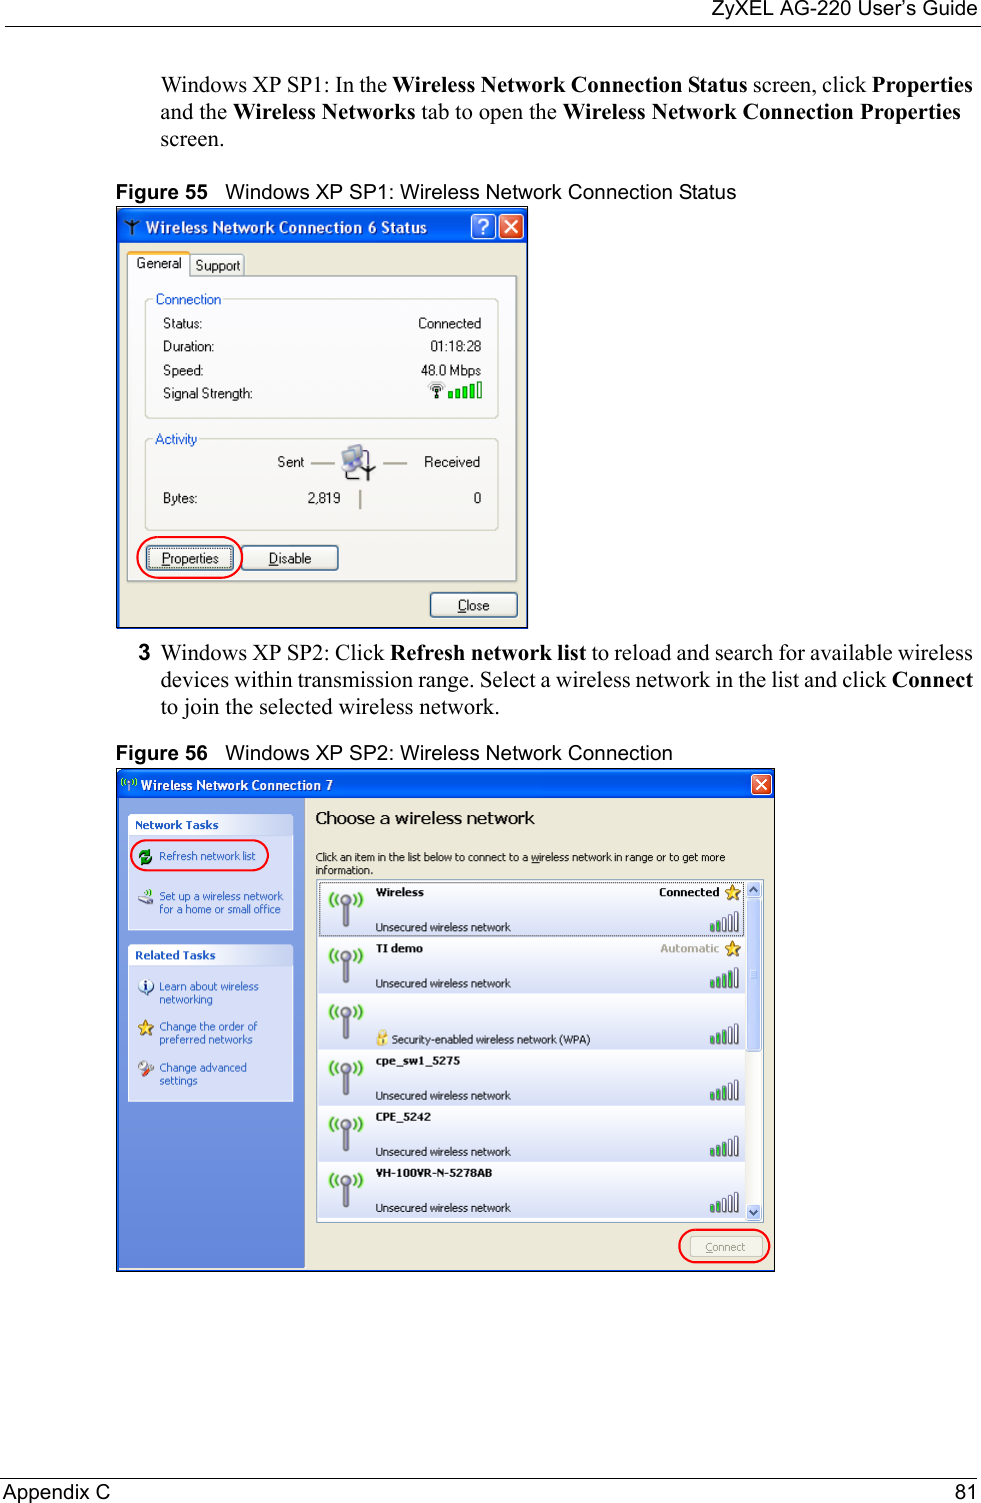 ZyXEL AG-220 User’s GuideAppendix C 81Windows XP SP1: In the Wireless Network Connection Status screen, click Properties and the Wireless Networks tab to open the Wireless Network Connection Properties screen.Figure 55   Windows XP SP1: Wireless Network Connection Status3Windows XP SP2: Click Refresh network list to reload and search for available wireless devices within transmission range. Select a wireless network in the list and click Connect to join the selected wireless network.Figure 56   Windows XP SP2: Wireless Network Connection